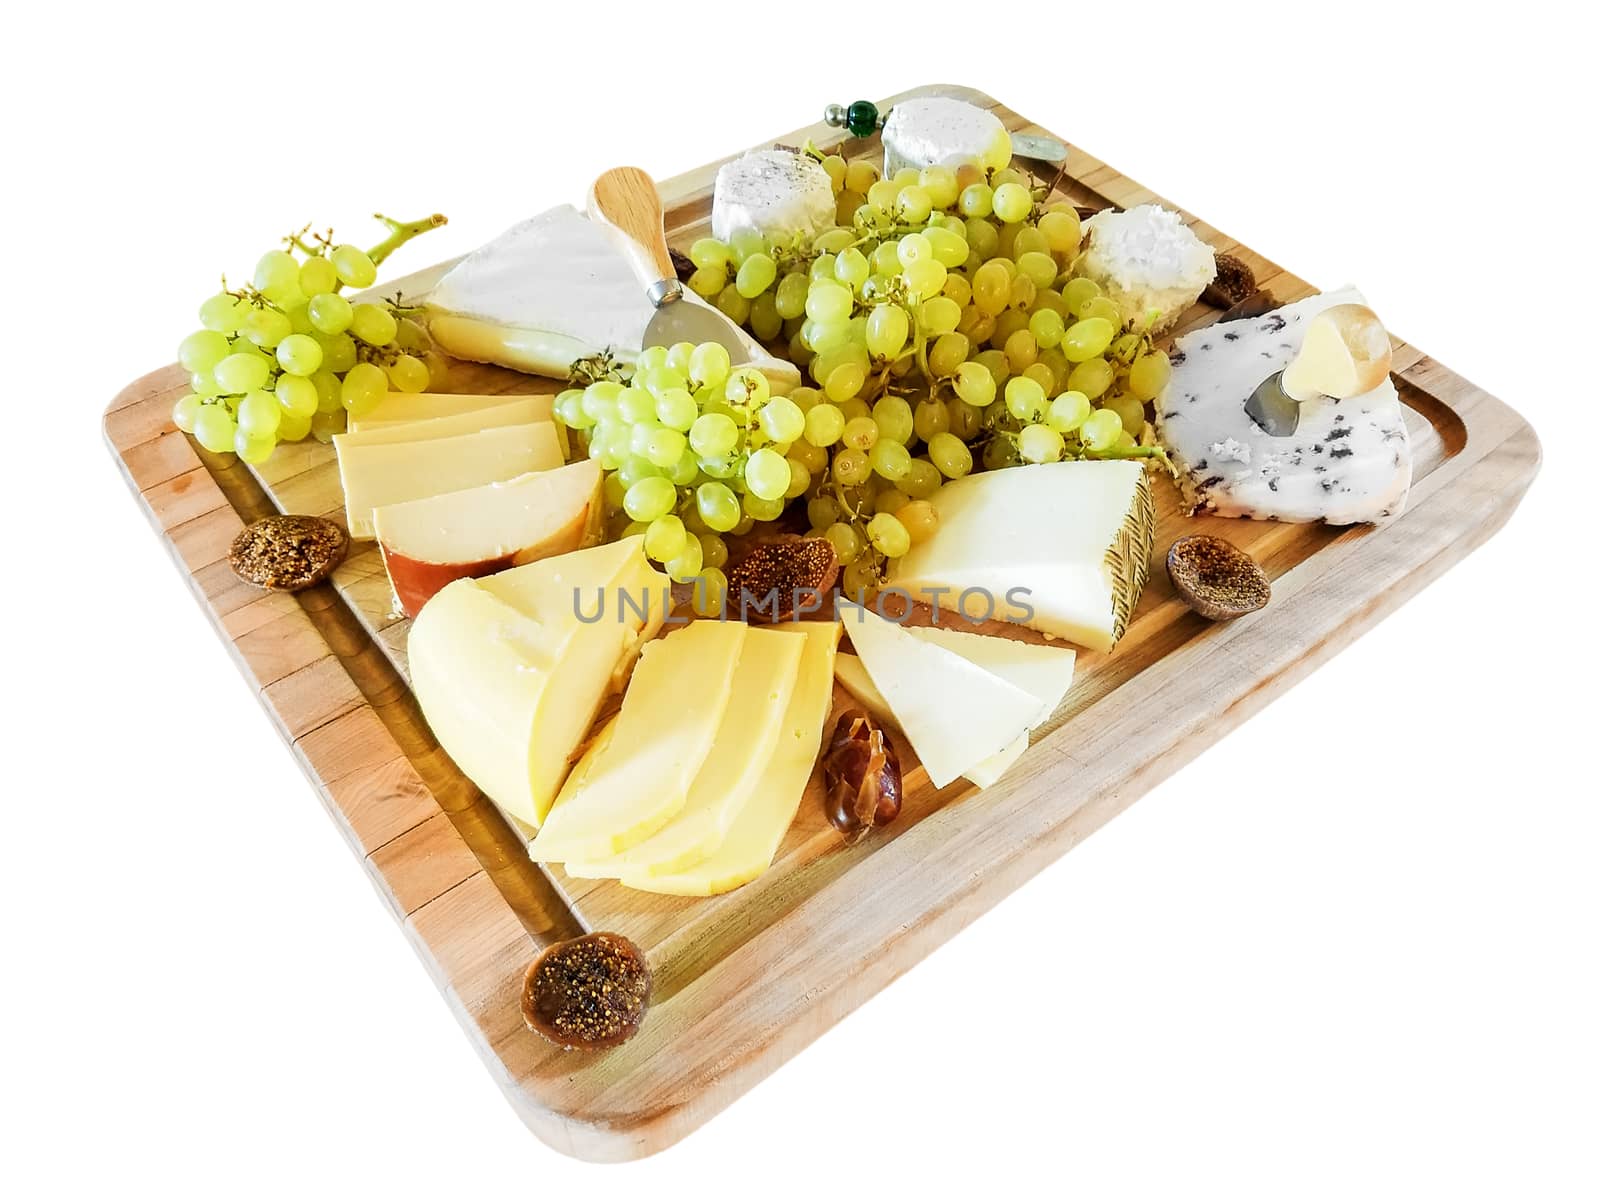 Gouda cheese, Brie, Wensleydale cheese with cranberries, and other cheeses, with green grapes, and figs, on a cutting board, isolated over white nackground.